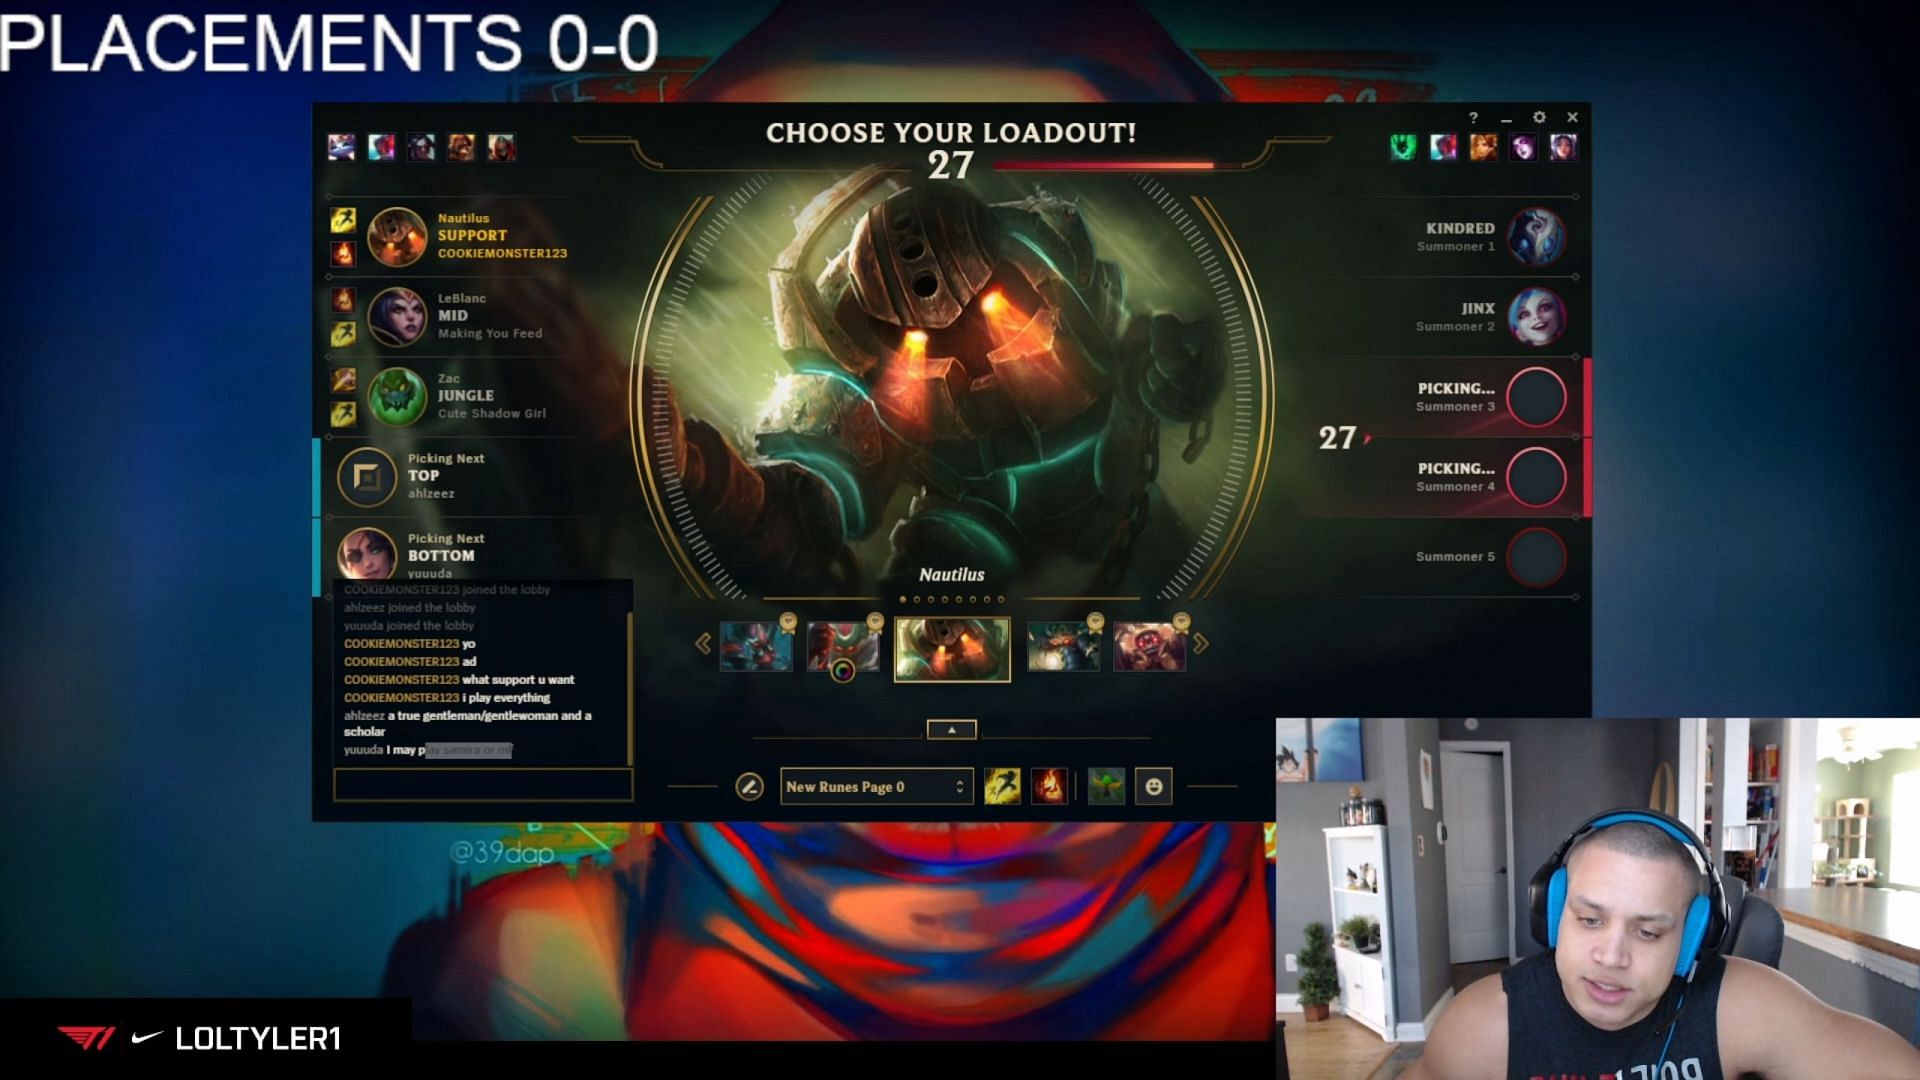 Tyler gets ruthless donation message during League of Legends Twitch stream (Images via twitch.tv/loltyler1)